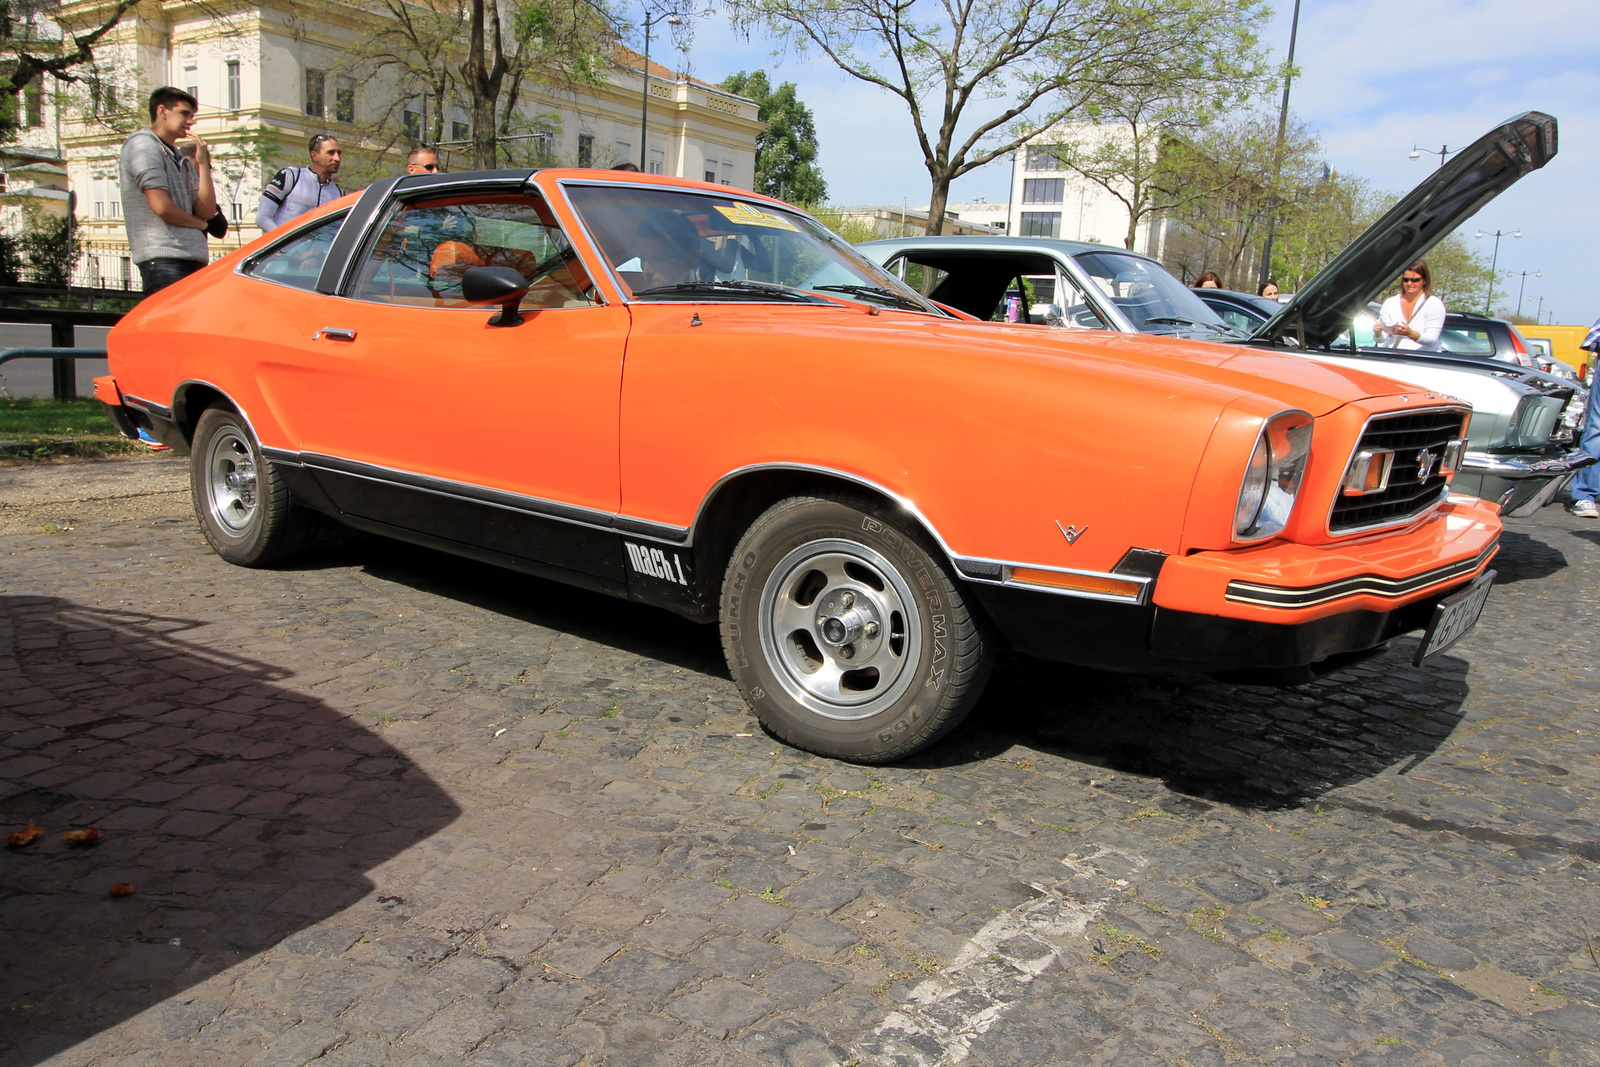 Ford Mustang II Mach 1